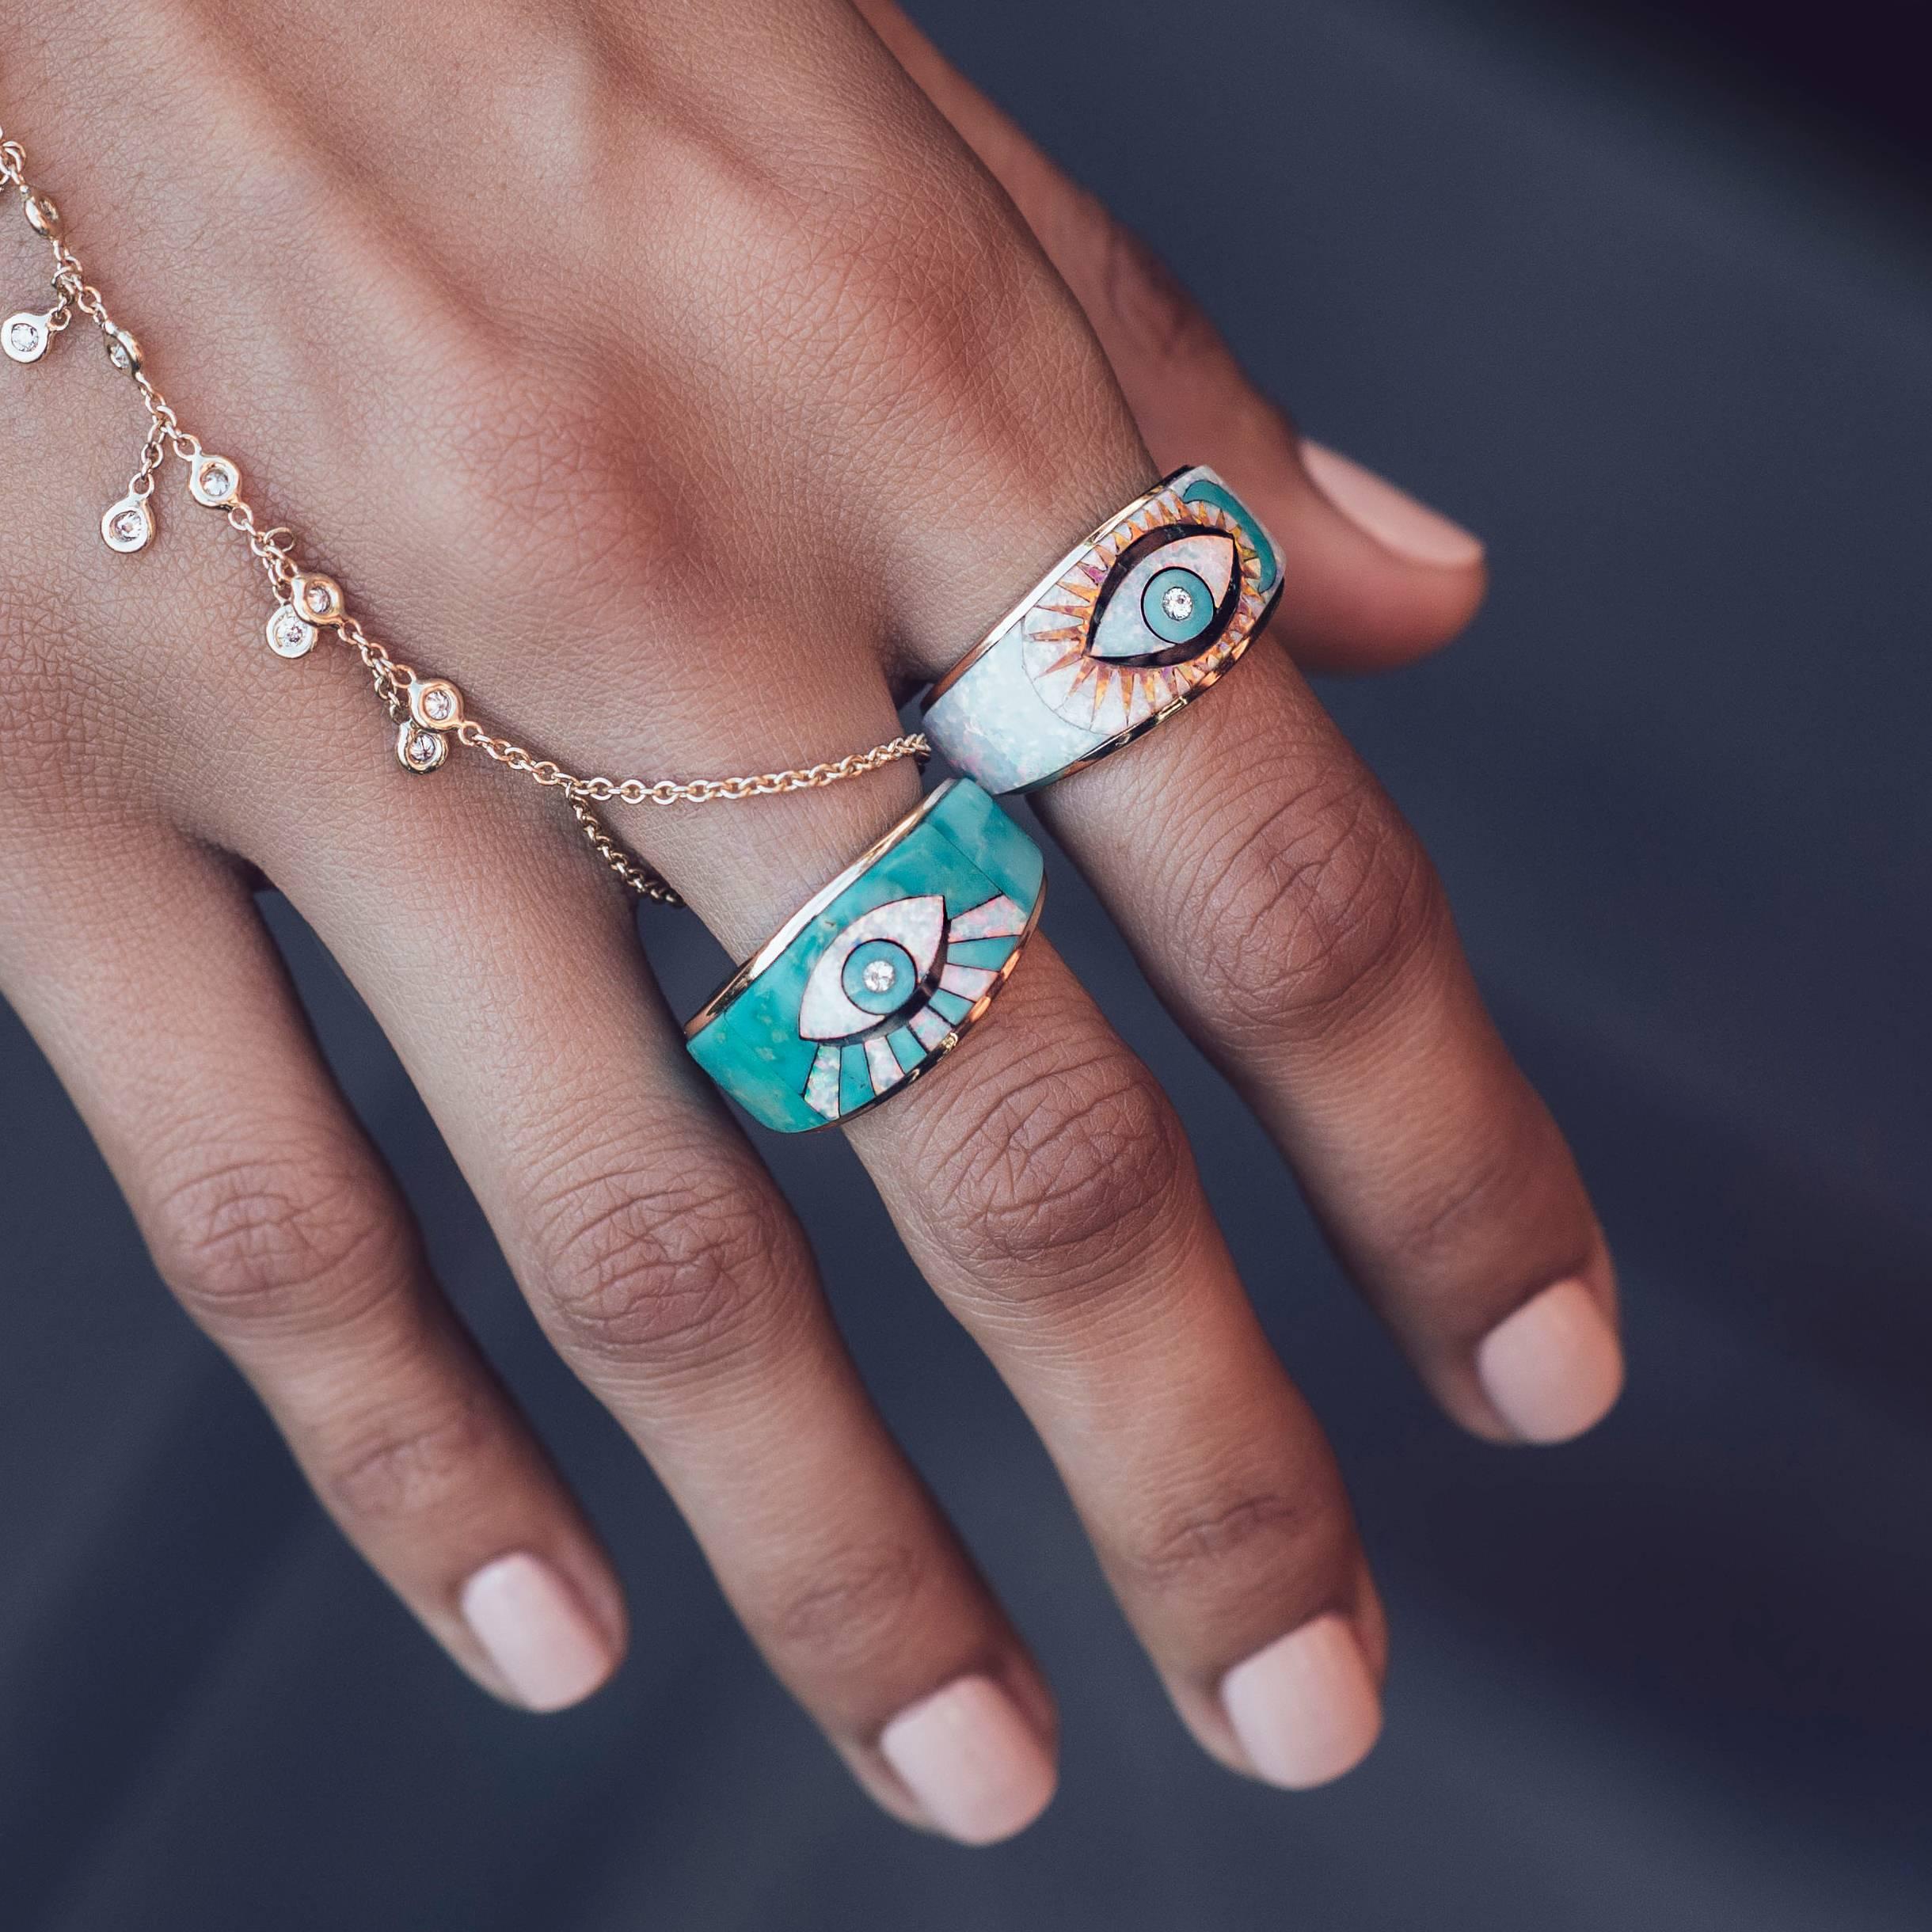 Opal, Onyx and Turquoise inlay Moon + Eye ring with diamond accents. Available in 14k Yellow, Rose or White Gold. 
The eye acts as a protector and good luck charm for its beholder.